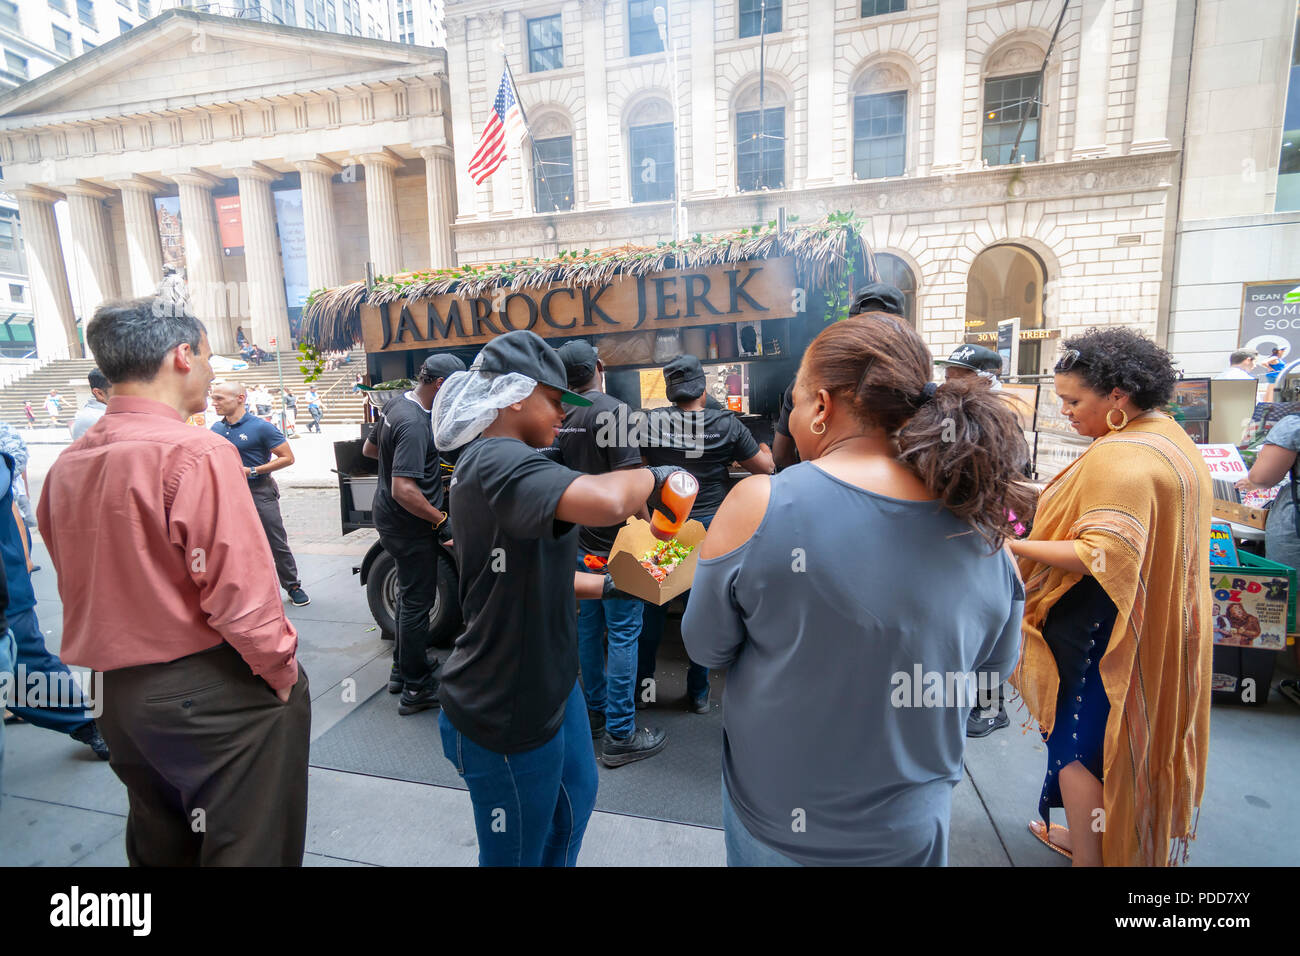 Wall Street workers and tourists line up at the popular Jamrock Jerk food cart on Wall Street in Lower Manhattan in New York on Friday, July 27, 2018. The family-owned and operated cart serves authentic Jamaican dishes to the hungry hordes who line up for a taste of the island. (Â© Richard B. Levine) Stock Photo